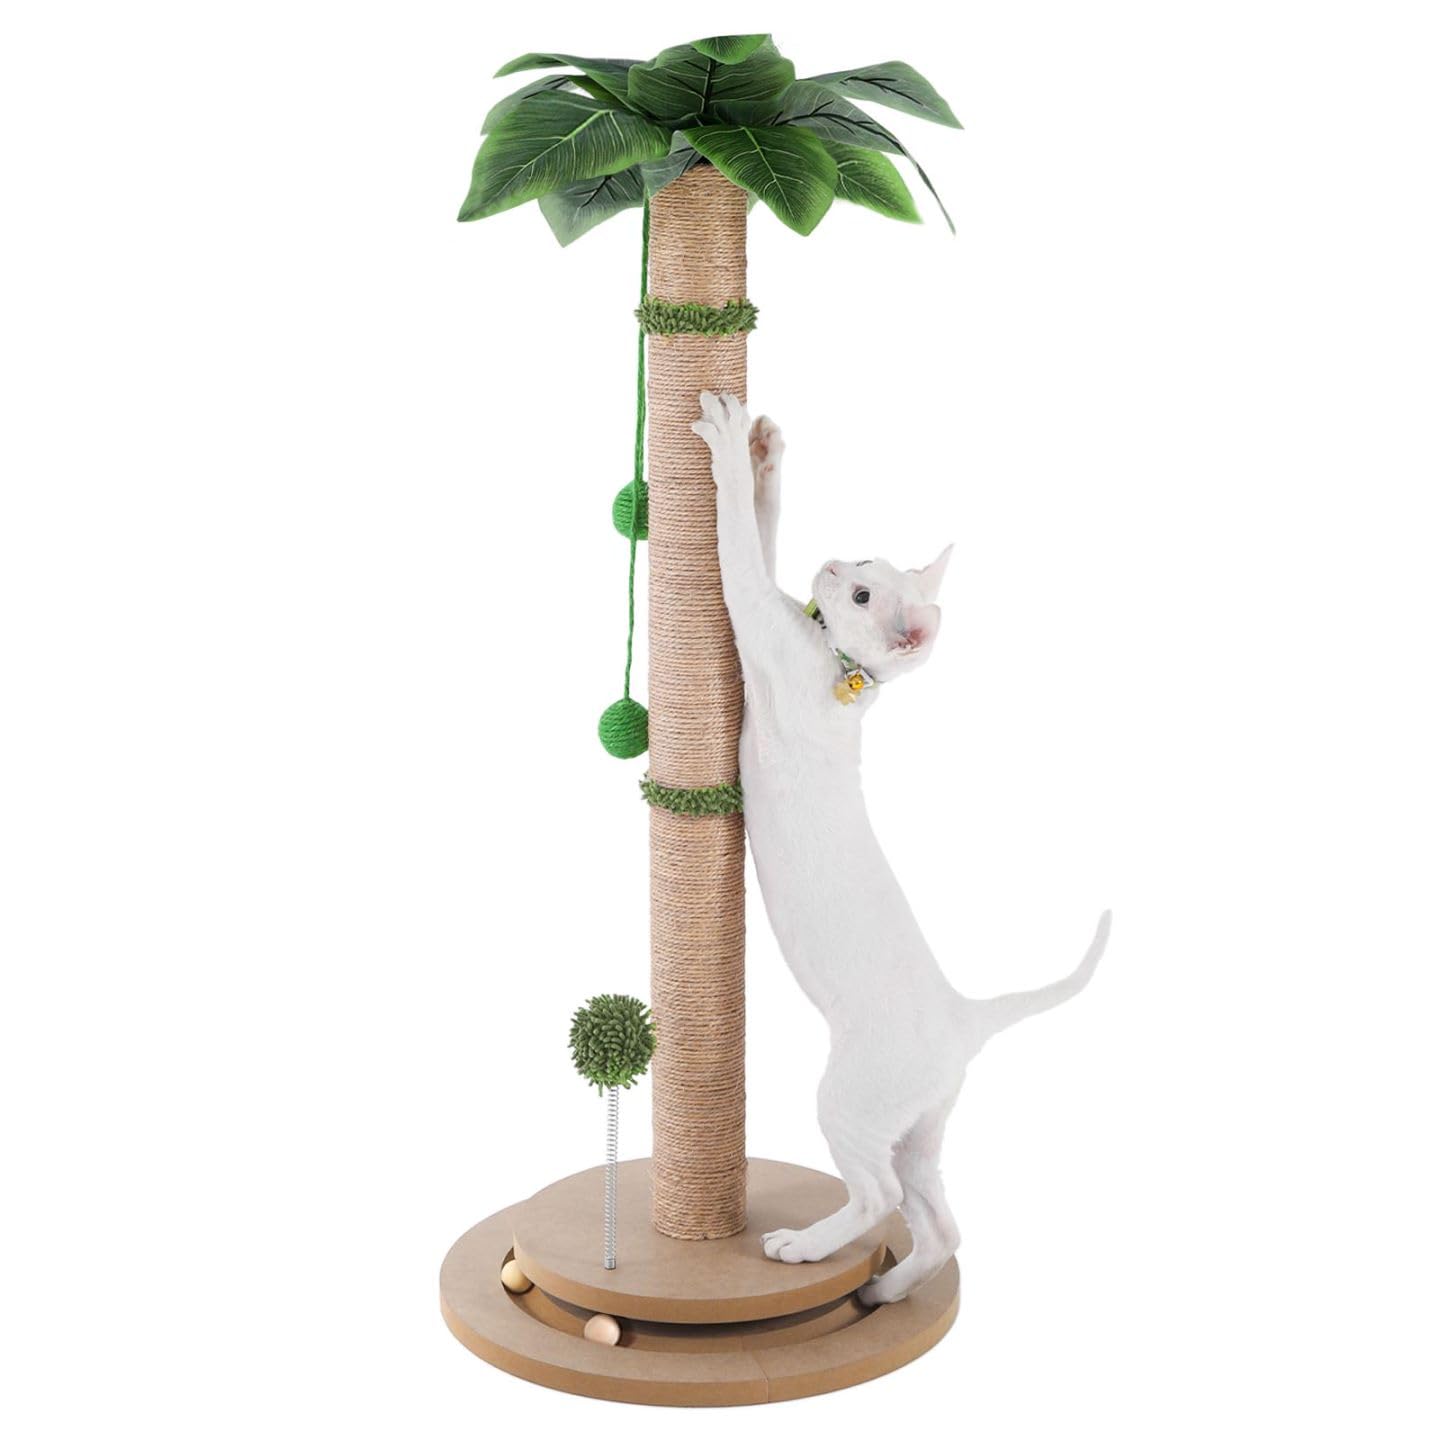 Aplatho Scratching Posts for Indoor Cats Adults - 33.2" Tall Cat Scratching Post with Sisal Rope - Cute Kitten Cat Tree Scratching Post with Interactive Ball Track